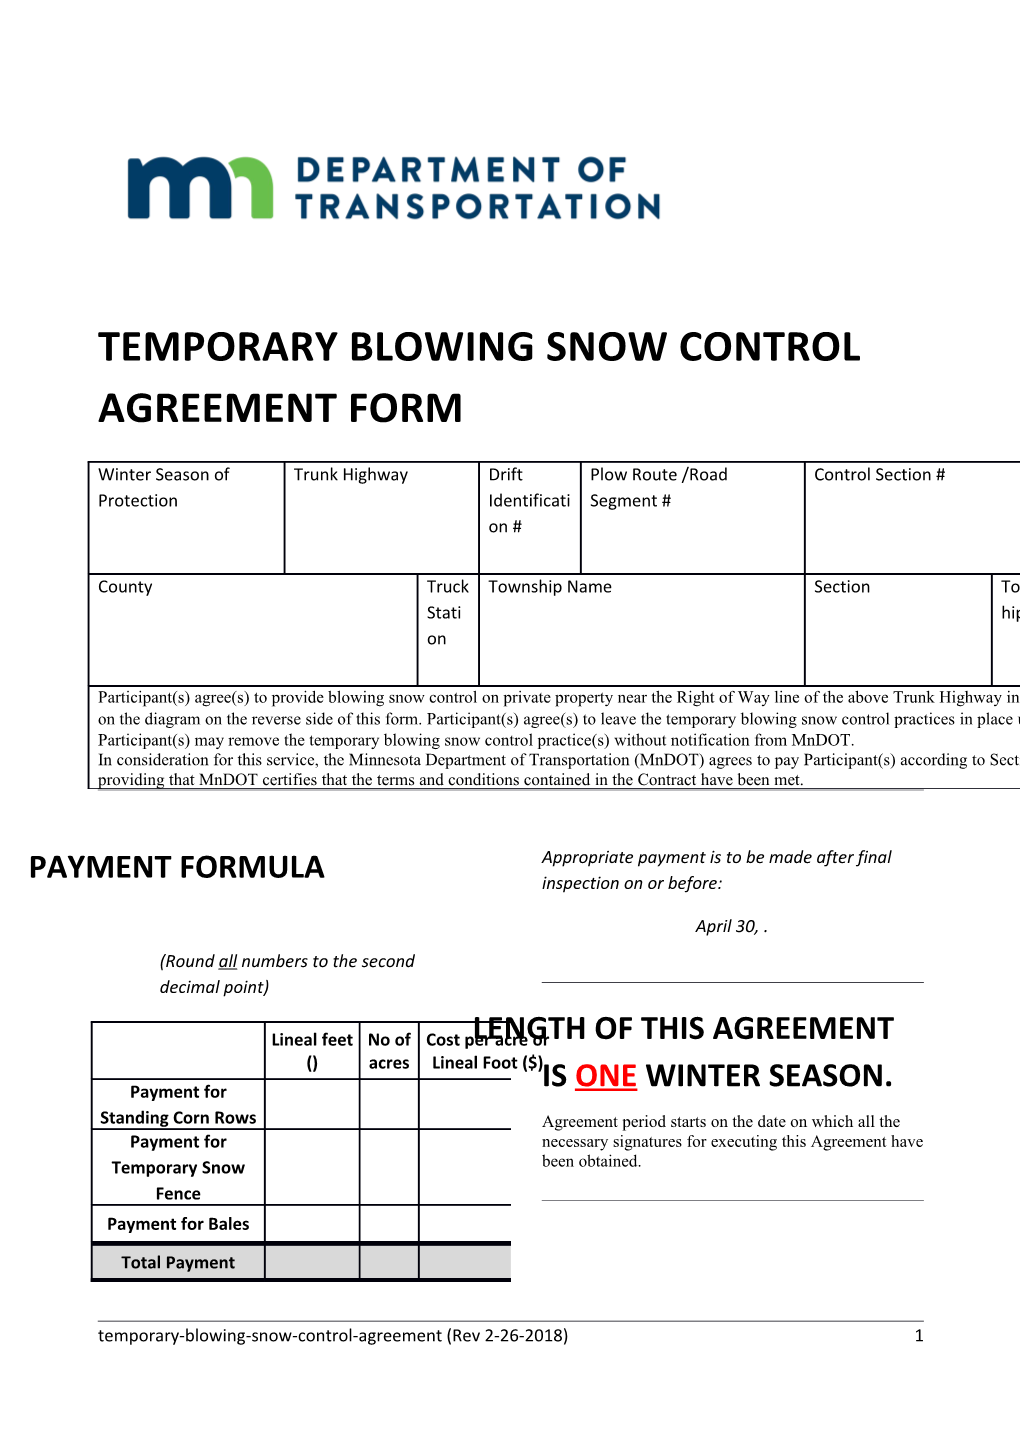 Temporary Blowing Snow Control Agreement Form